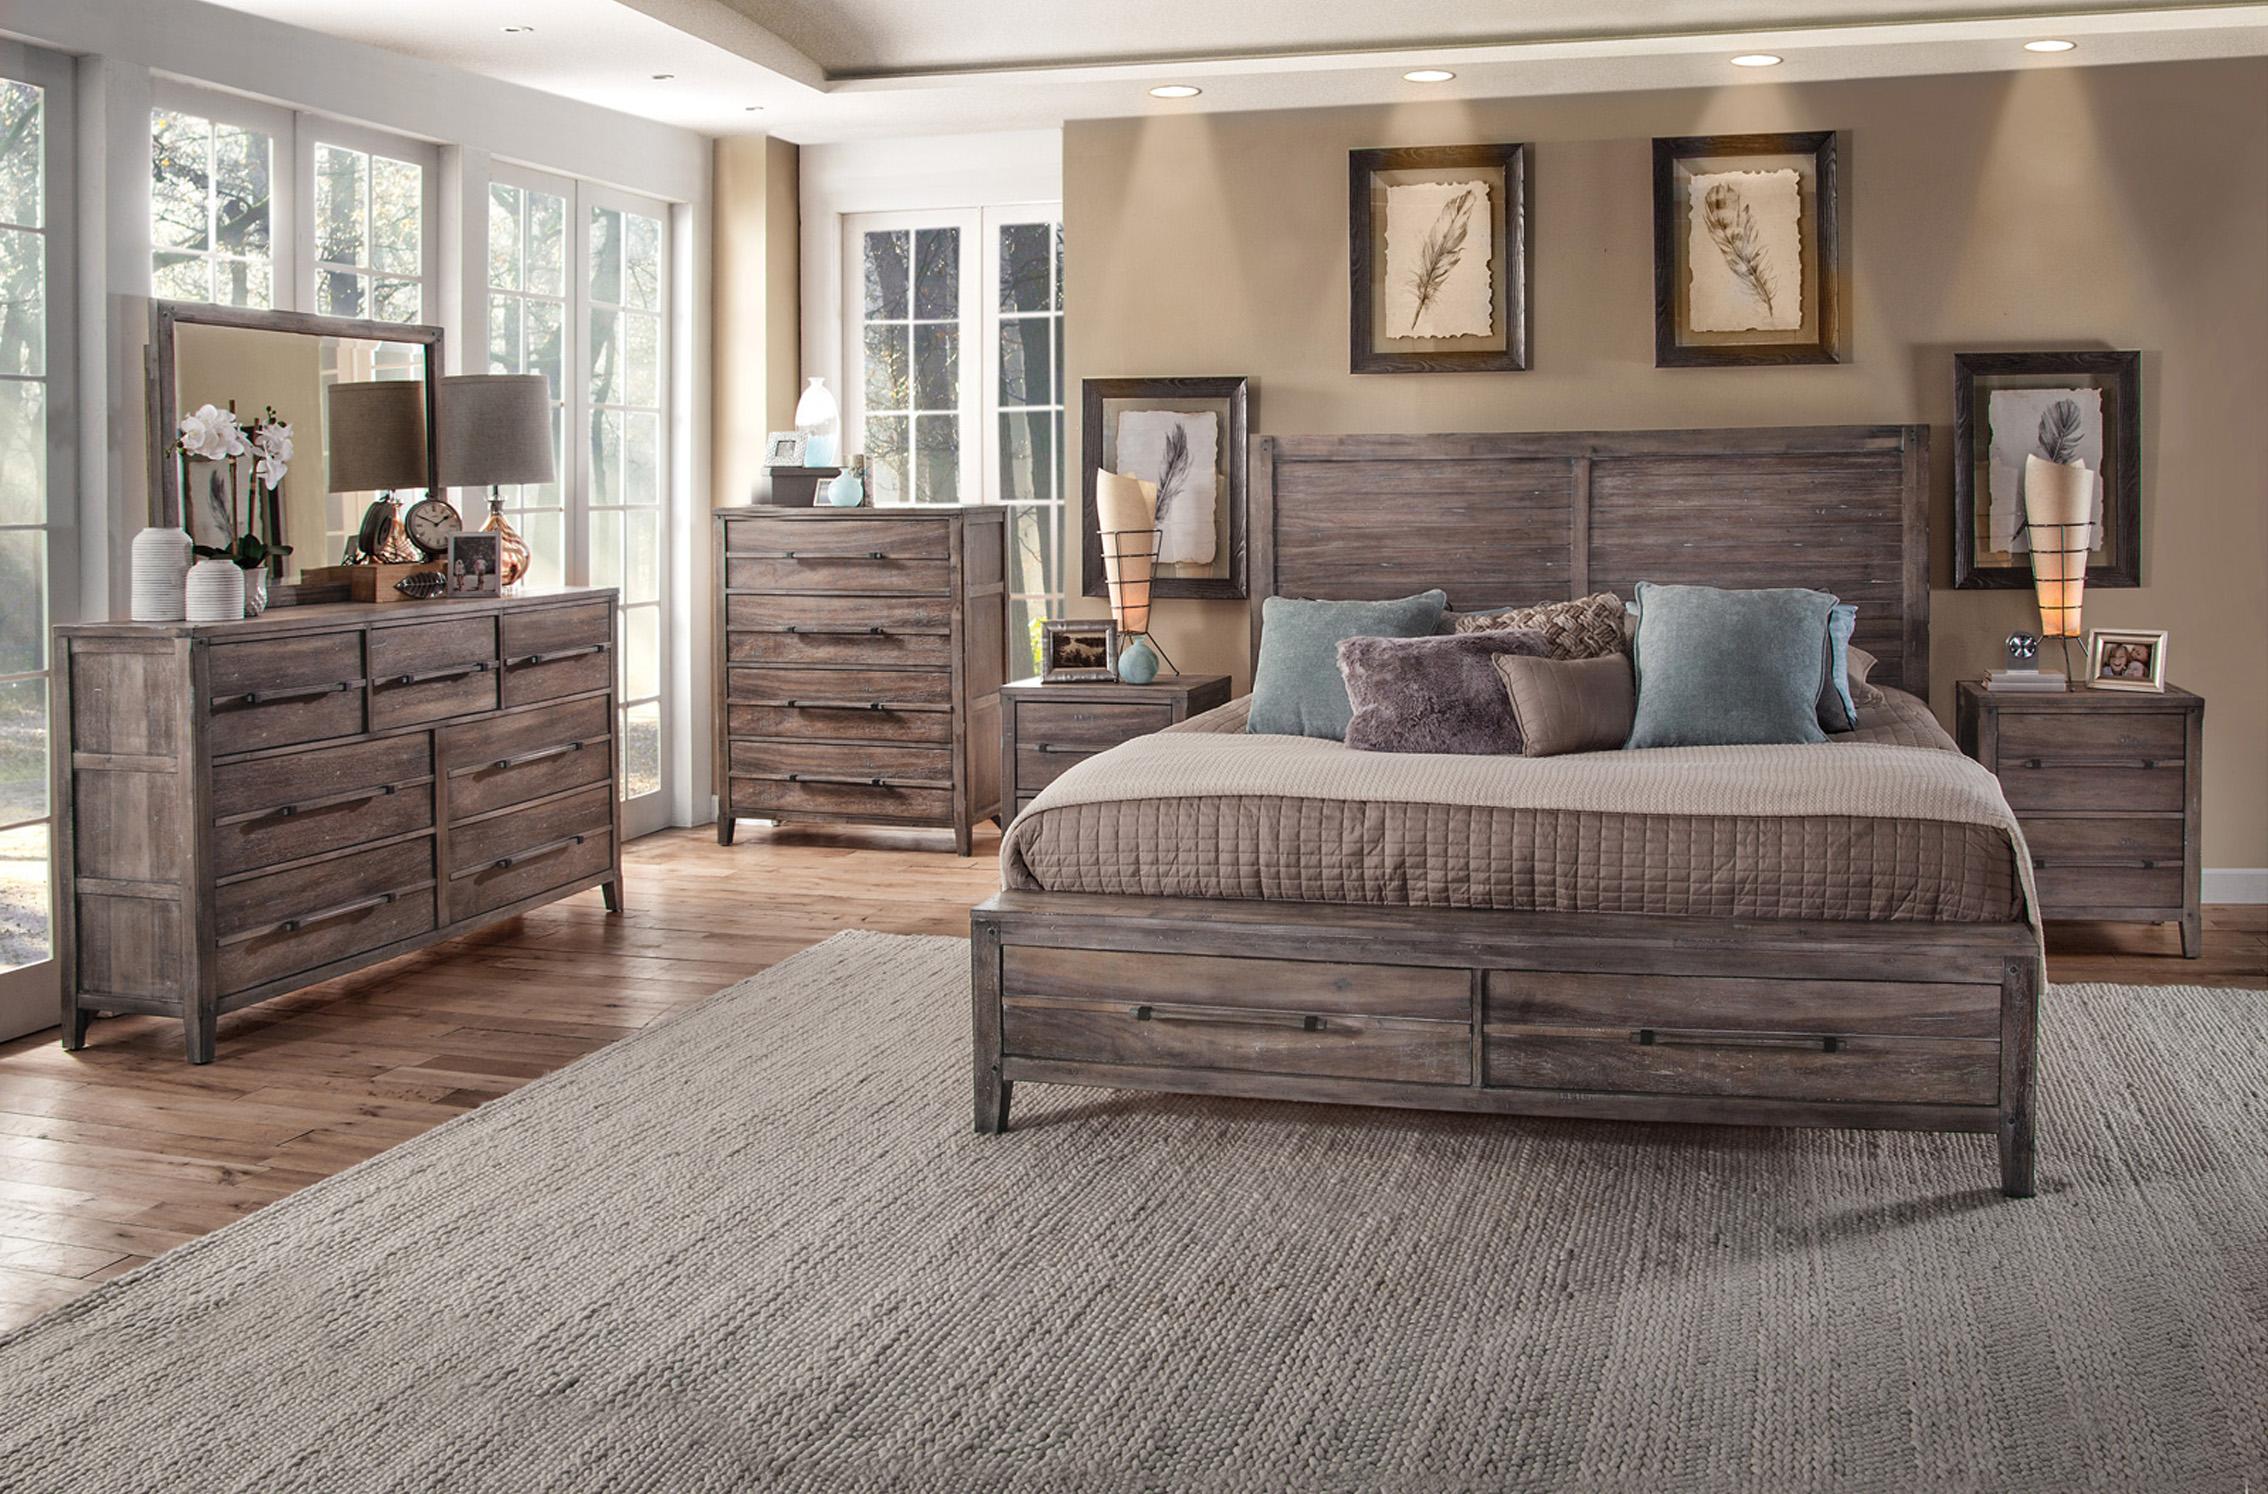 Classic, Traditional Panel Bedroom Set AURORA 2800-50PNST 2800-QPNST-3PC in Driftwood, Gray 